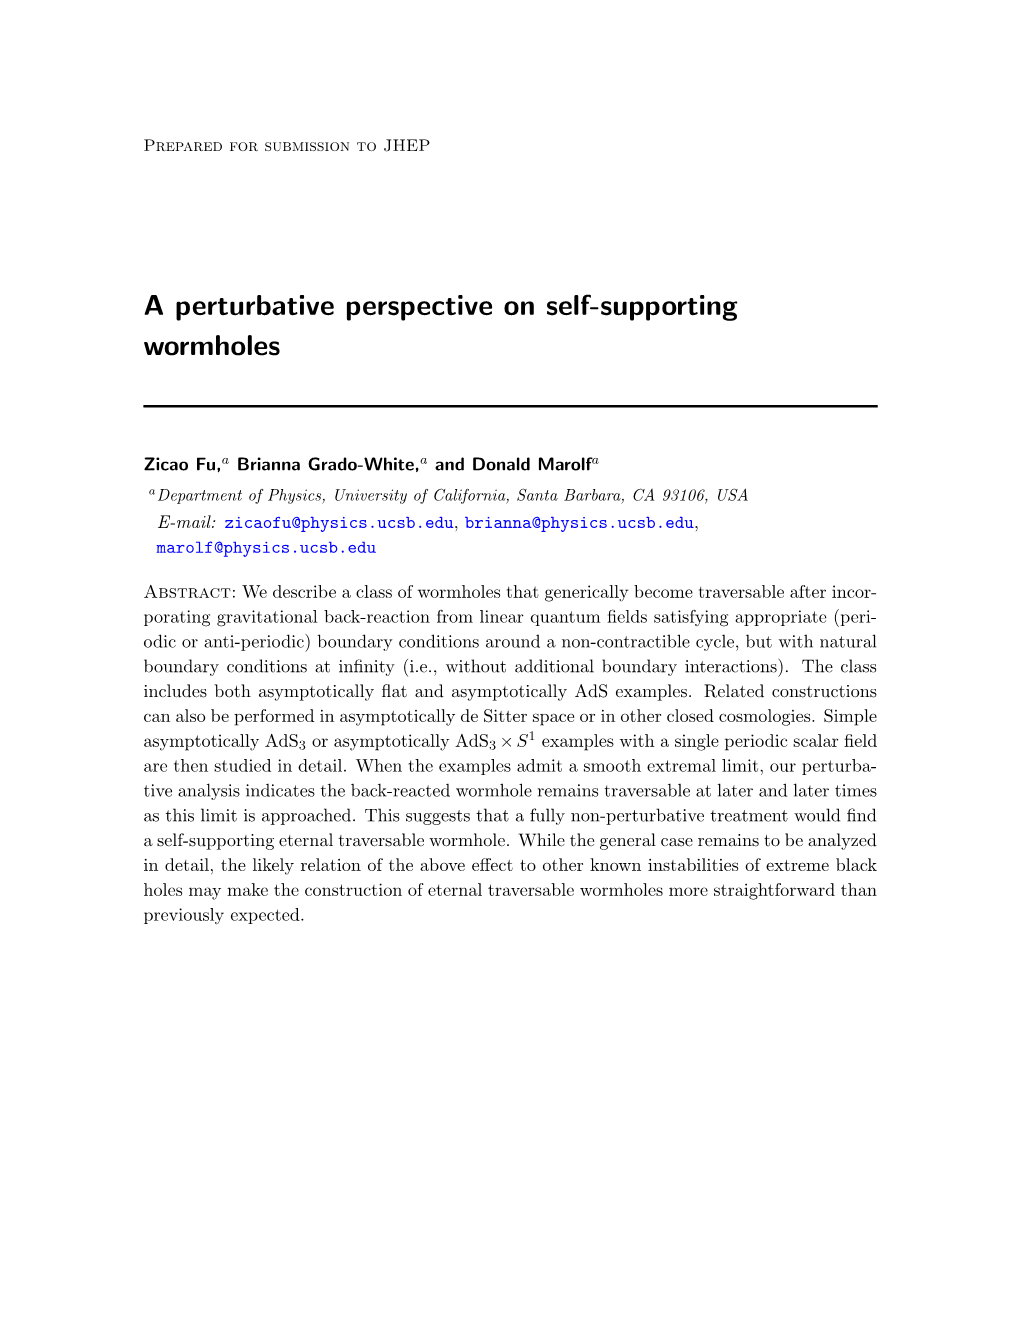 A Perturbative Perspective on Self-Supporting Wormholes